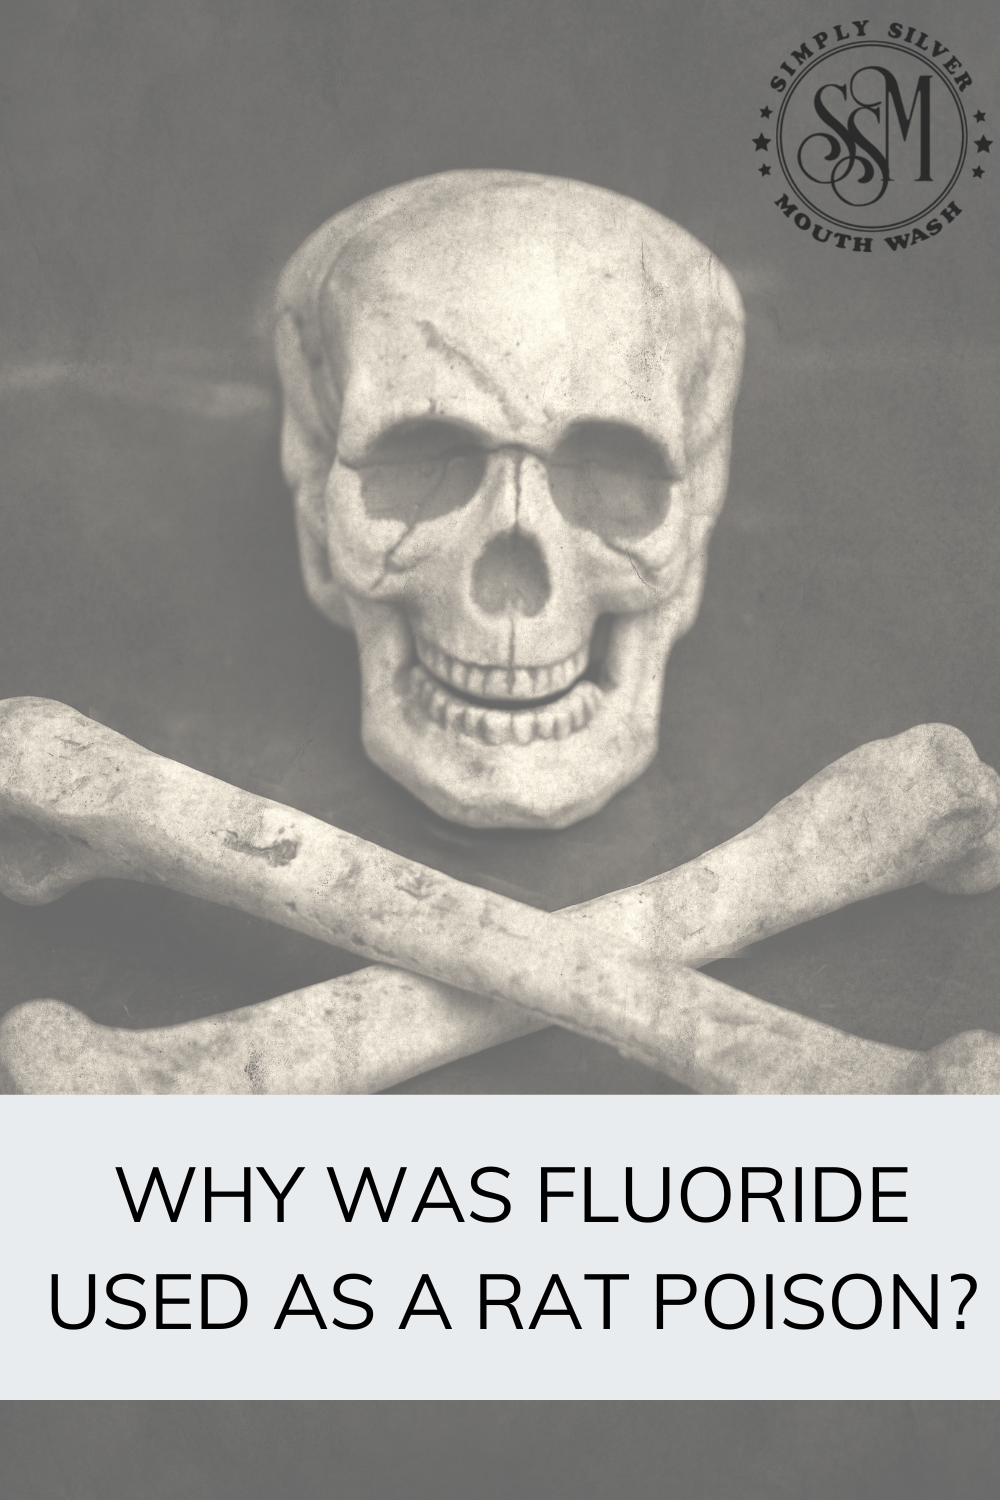 Why was fluoride used as rat poison